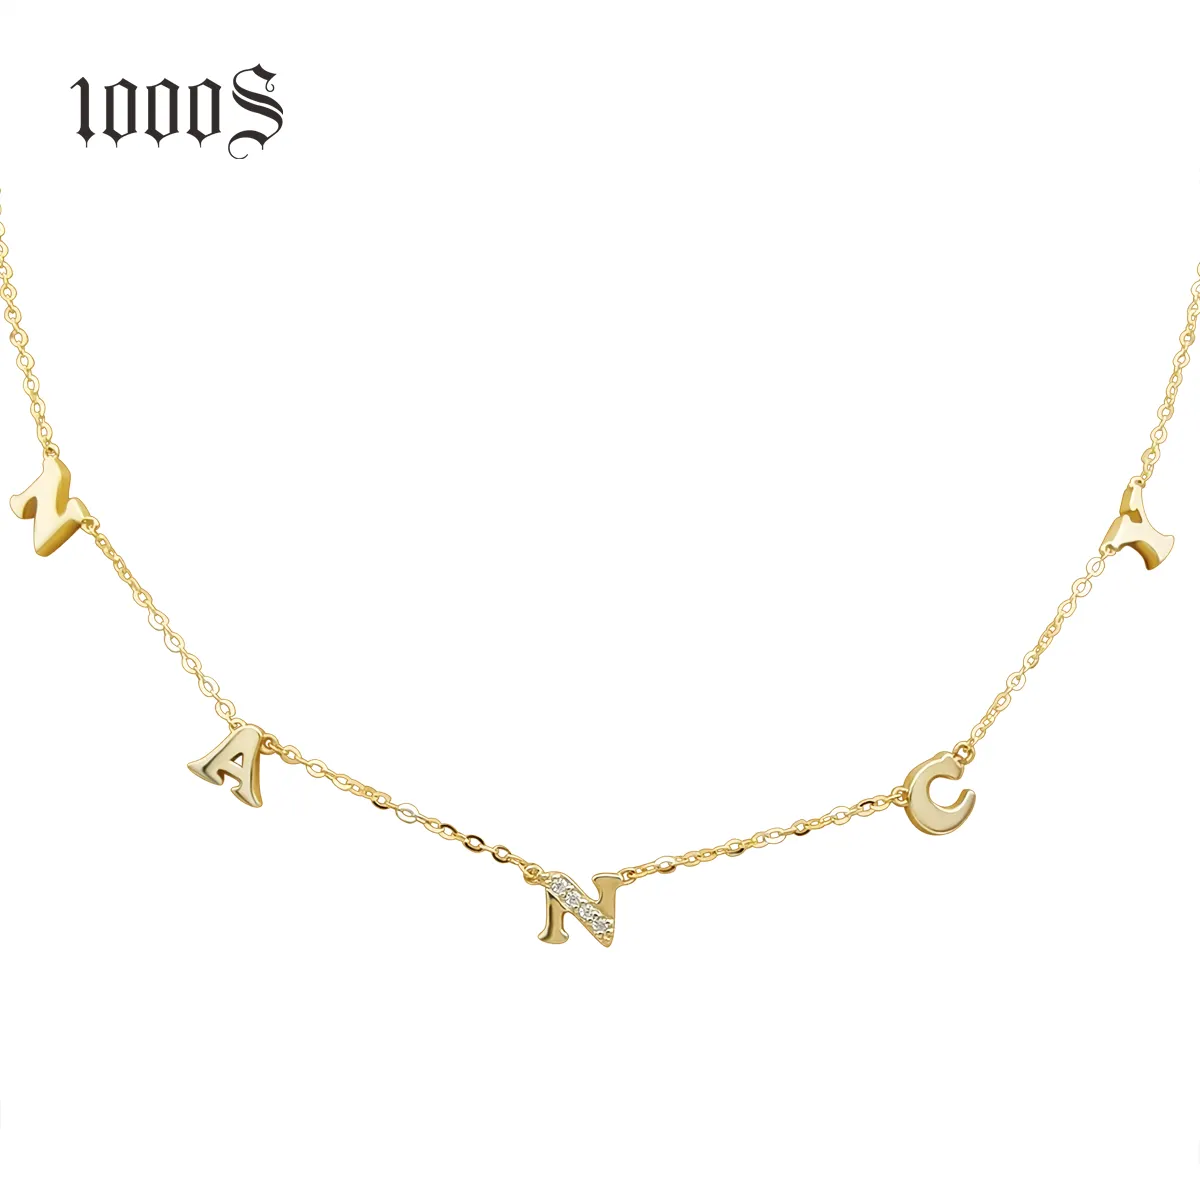 Name Necklace Jewelry Gold Personalised Customized 9K 14K 18K Solid Trendy Gold Cuban Link Chain Diamond Charm Necklaces